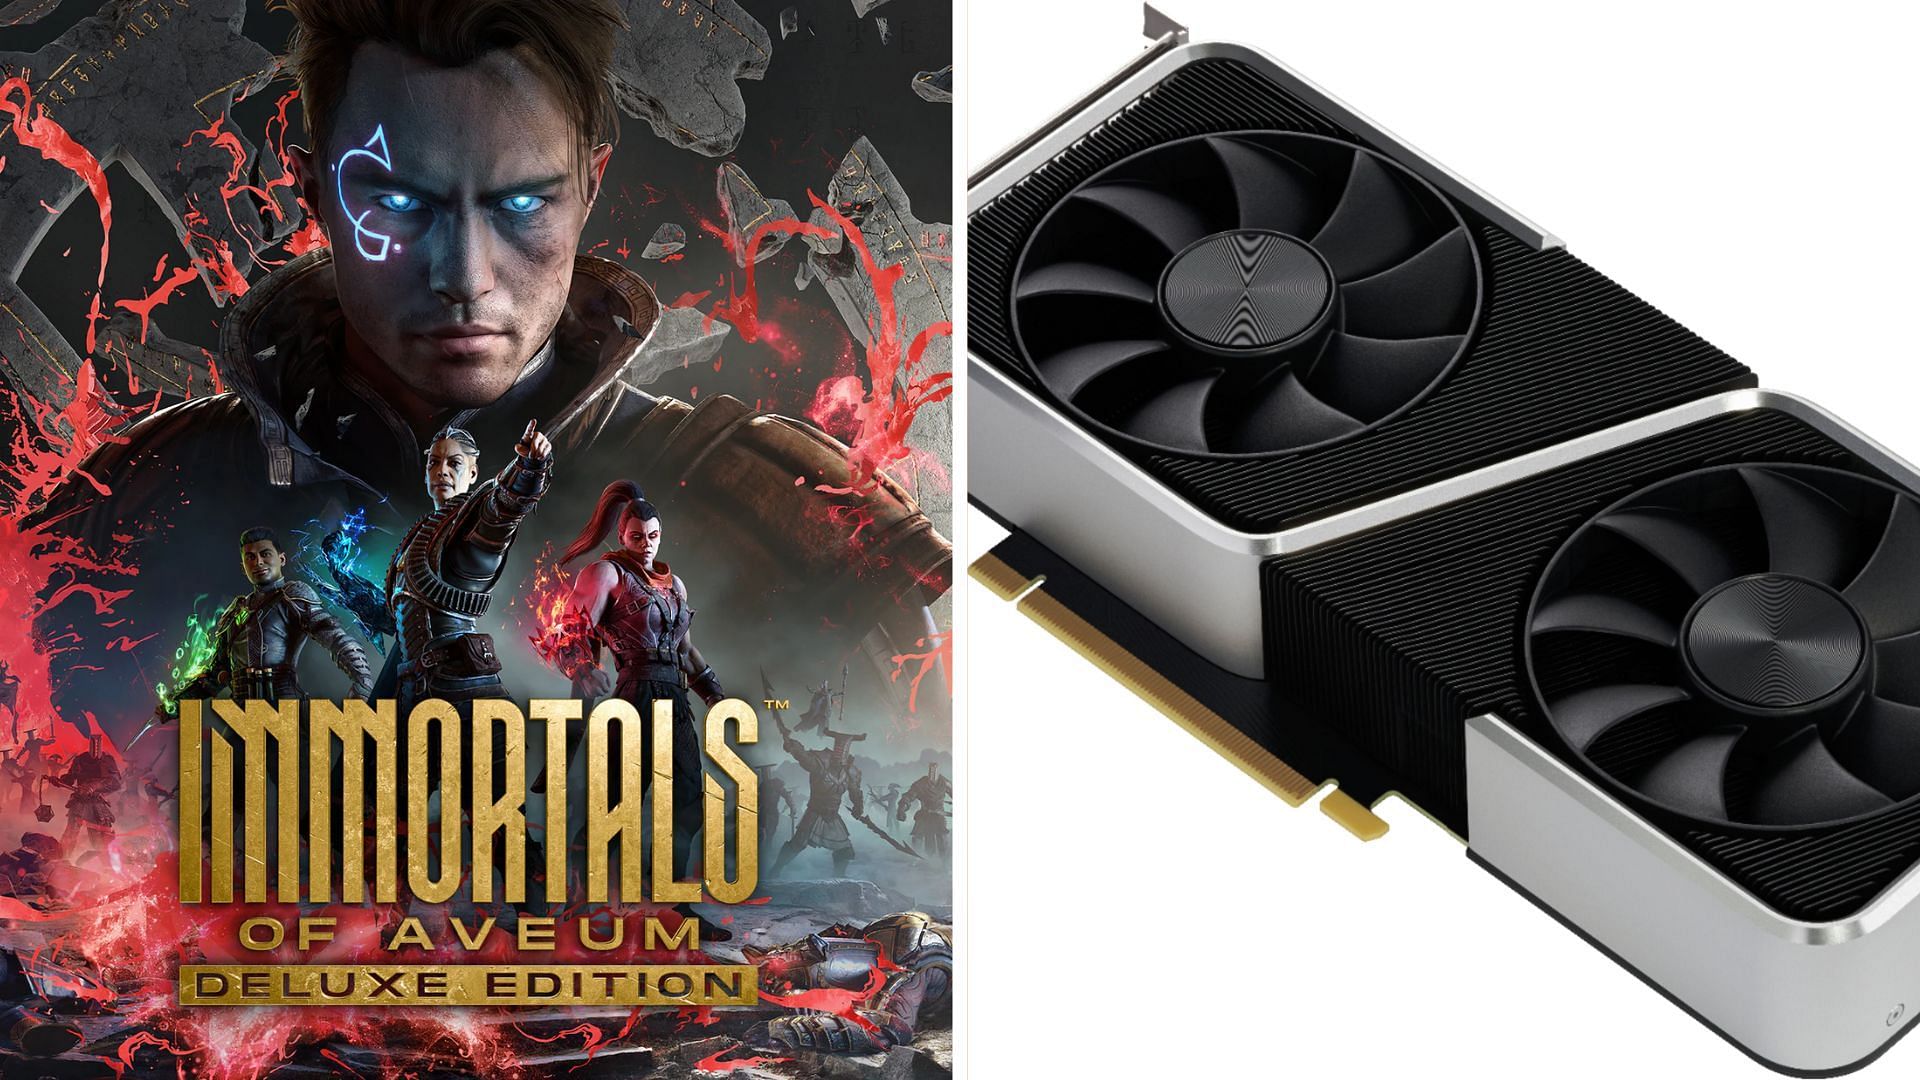 The RTX 3060 and 3060 Ti are superb cards for playing Immortals of Aveum (Image via EA and Nvidia)